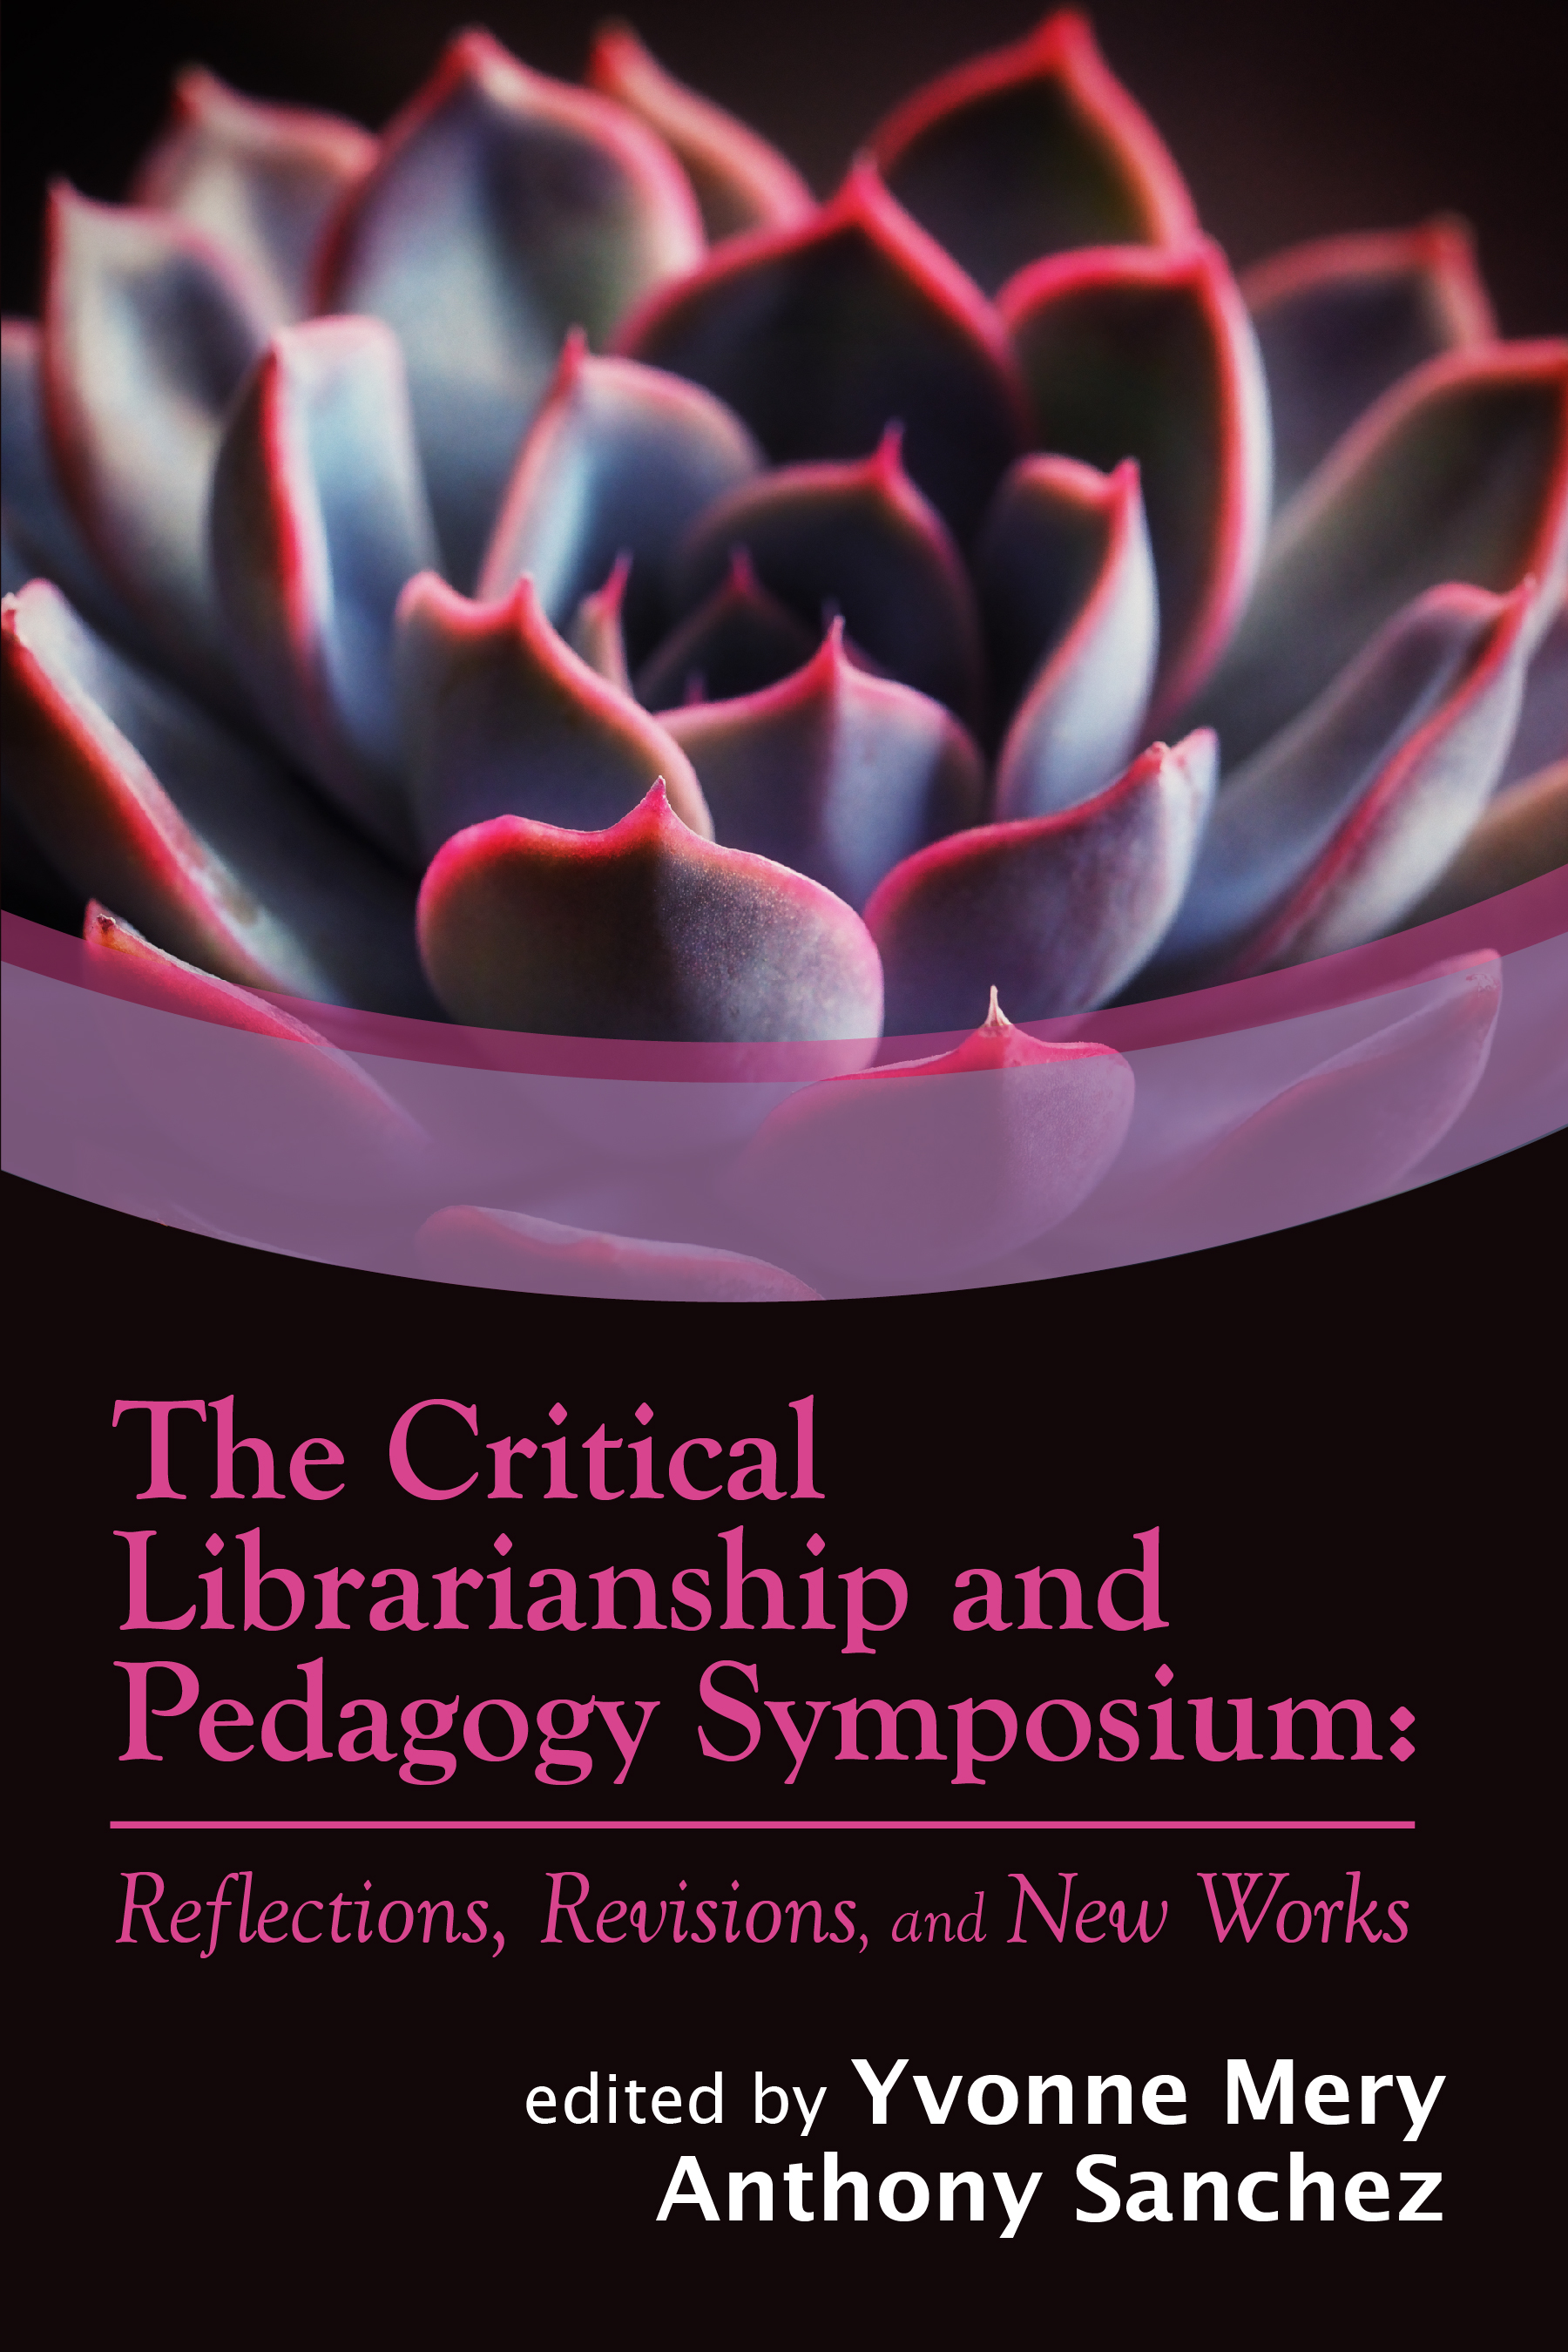 book cover for The Critical Librarianship and Pedagogy Symposium